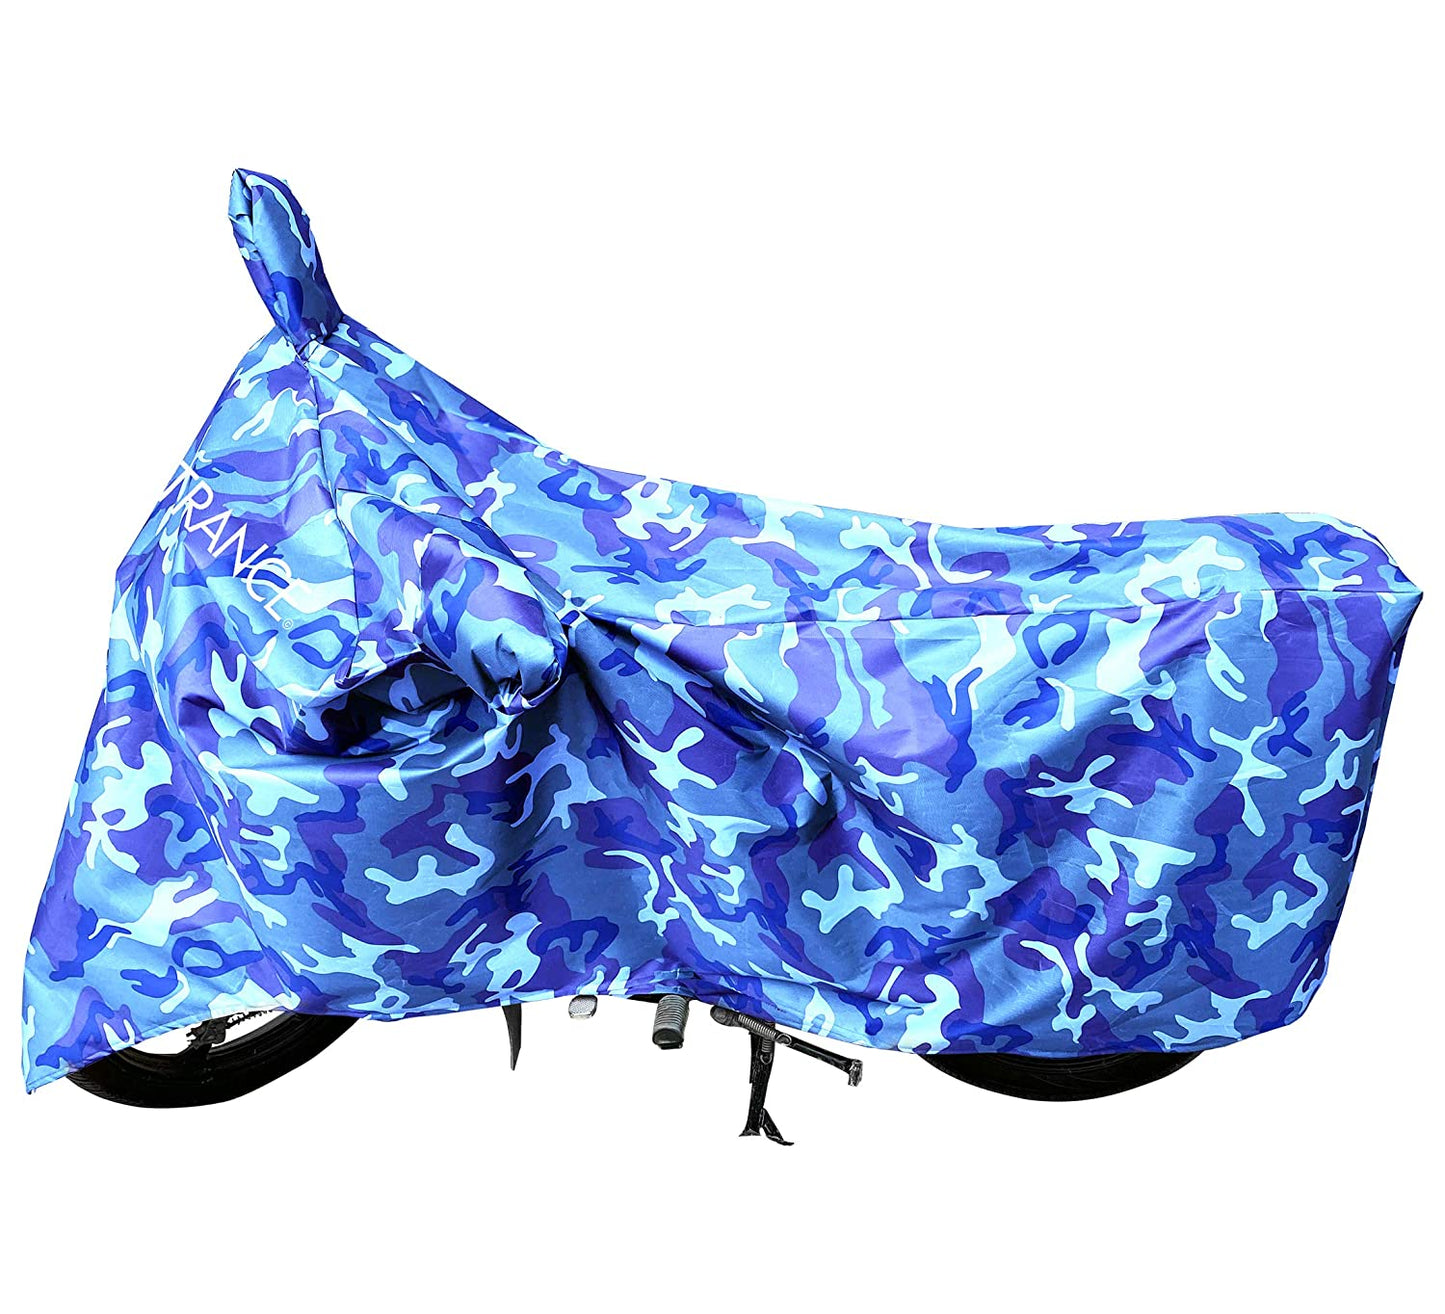 MotoTrance Jungle Bike Body Covers For OkinawaÂ  Lite 2019 - Interlock-Stitched Waterproof and Heat Resistant with Mirror Pockets